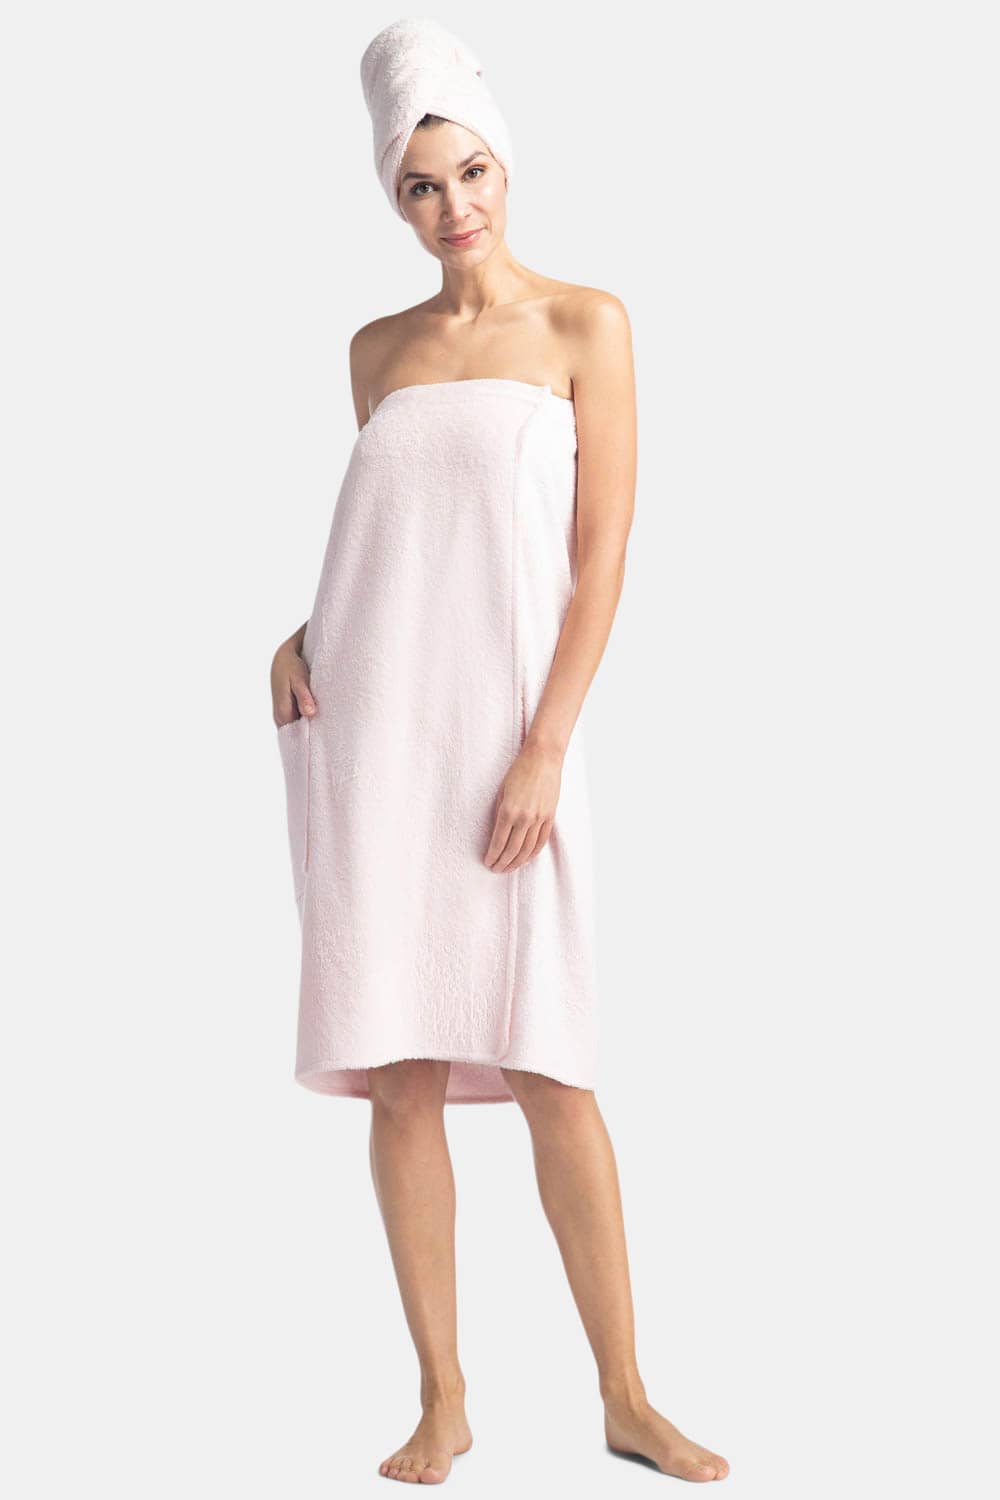 Women's Terry Cloth Spa Package - Body Wrap and Hair Towel Womens>Spa>Set Fishers Finery One-Size Heavenly Pink 1